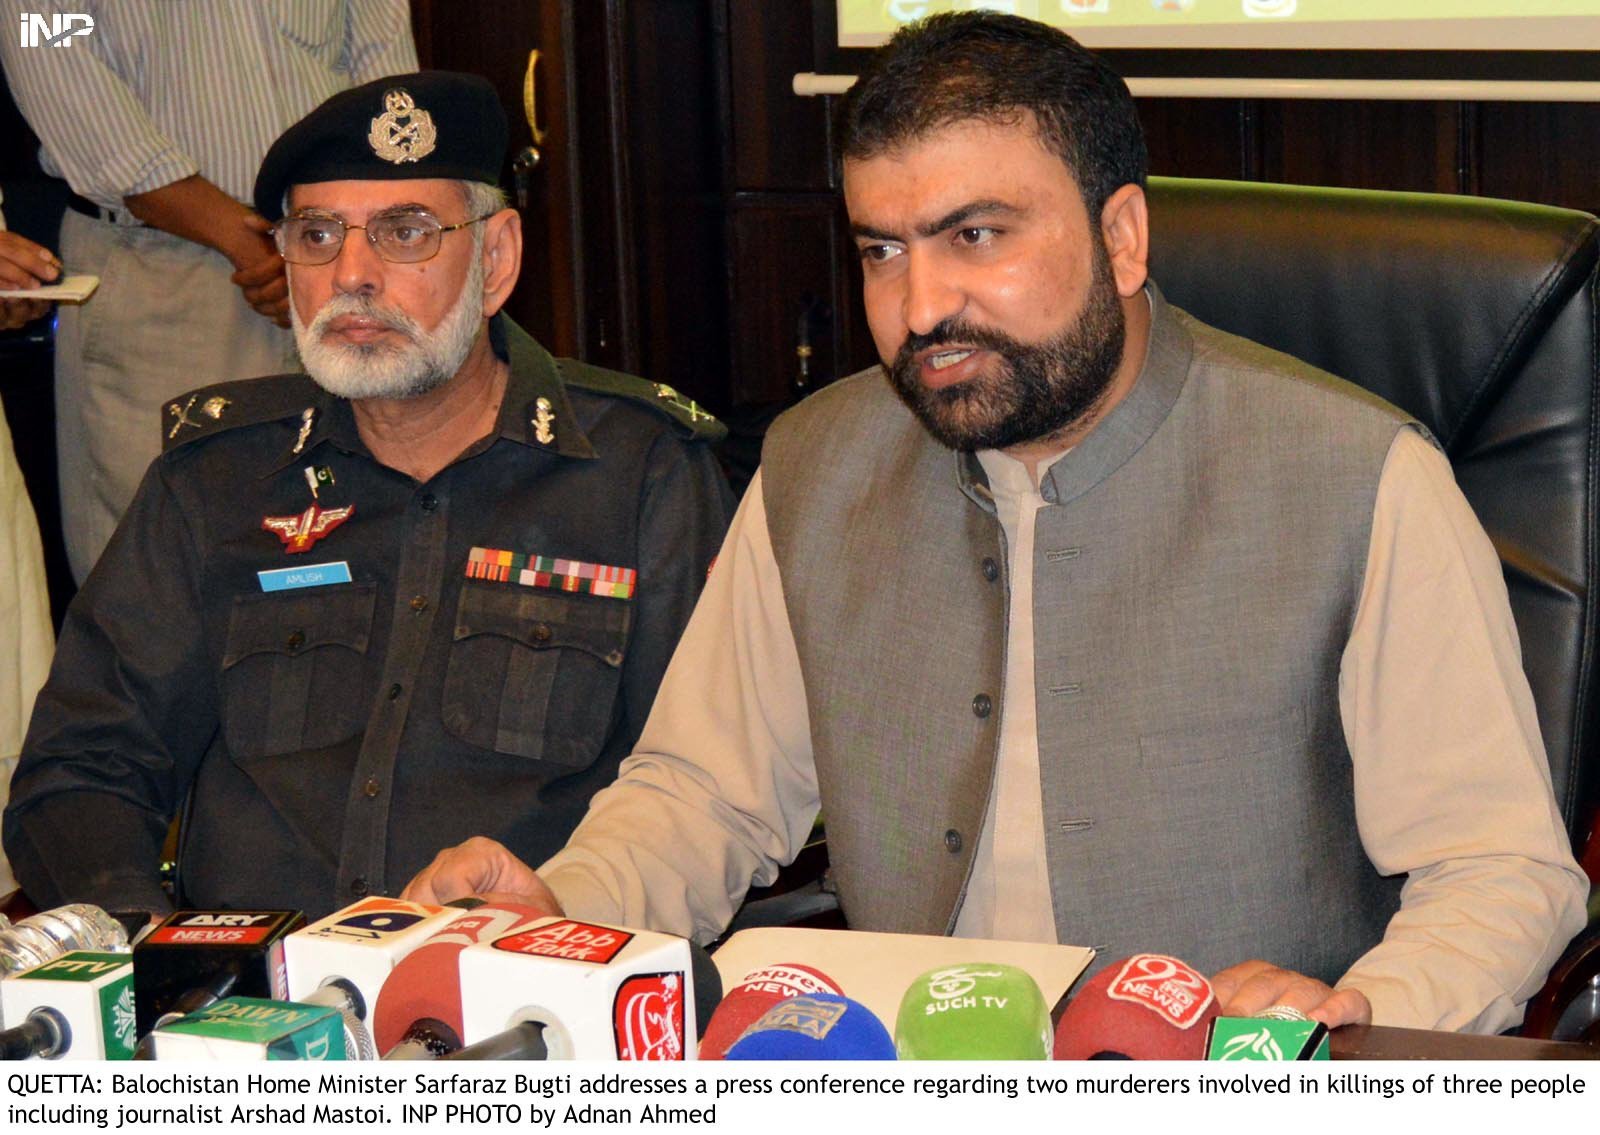 balochistan home minister sarfaraz bugti addresses a press conference in quetta on september 1 2015 photo inp